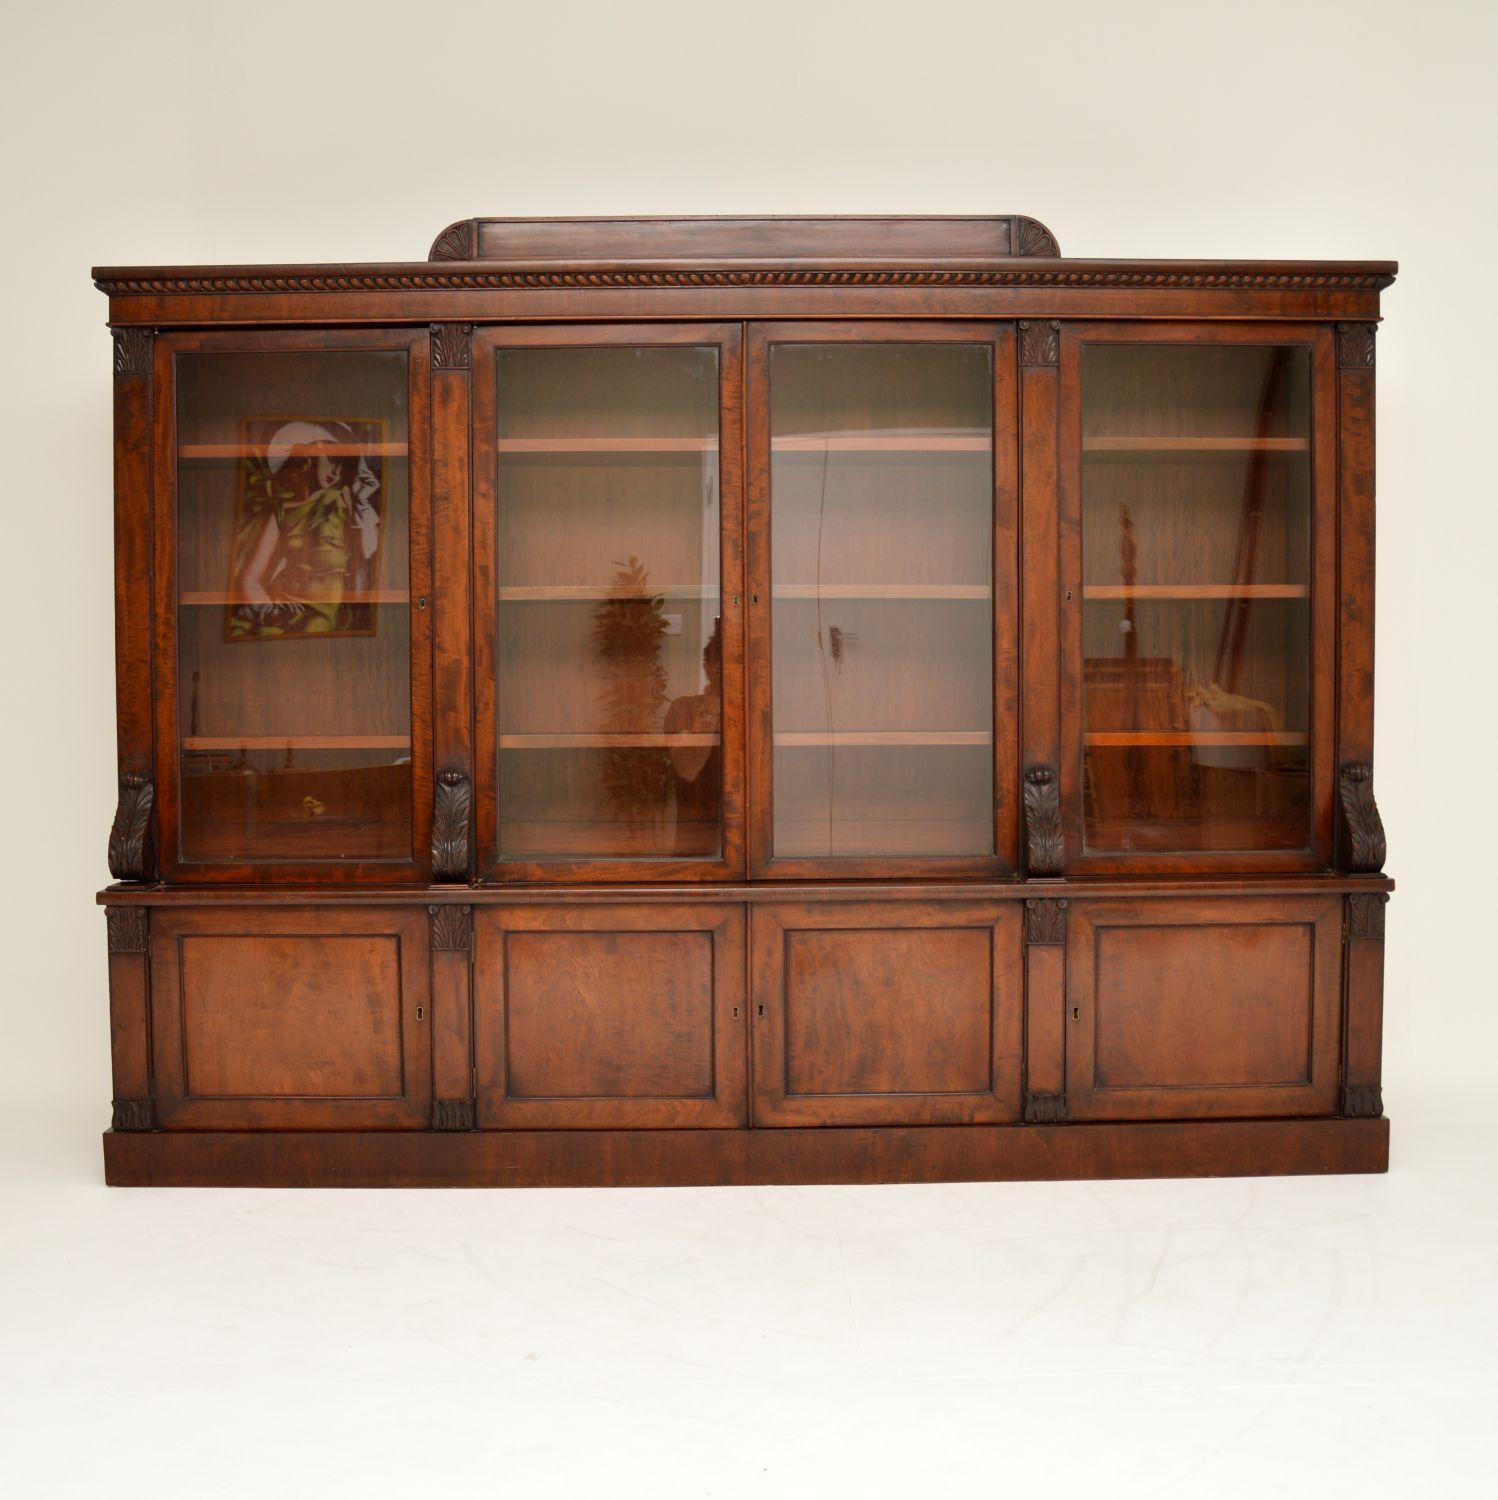 Very impressive top quality George IV mahogany dwarf bookcase dating from circa 1825 period and in excellent original condition. It has a wonderful original color and patina.

It just came out of a private London residence and was in very good